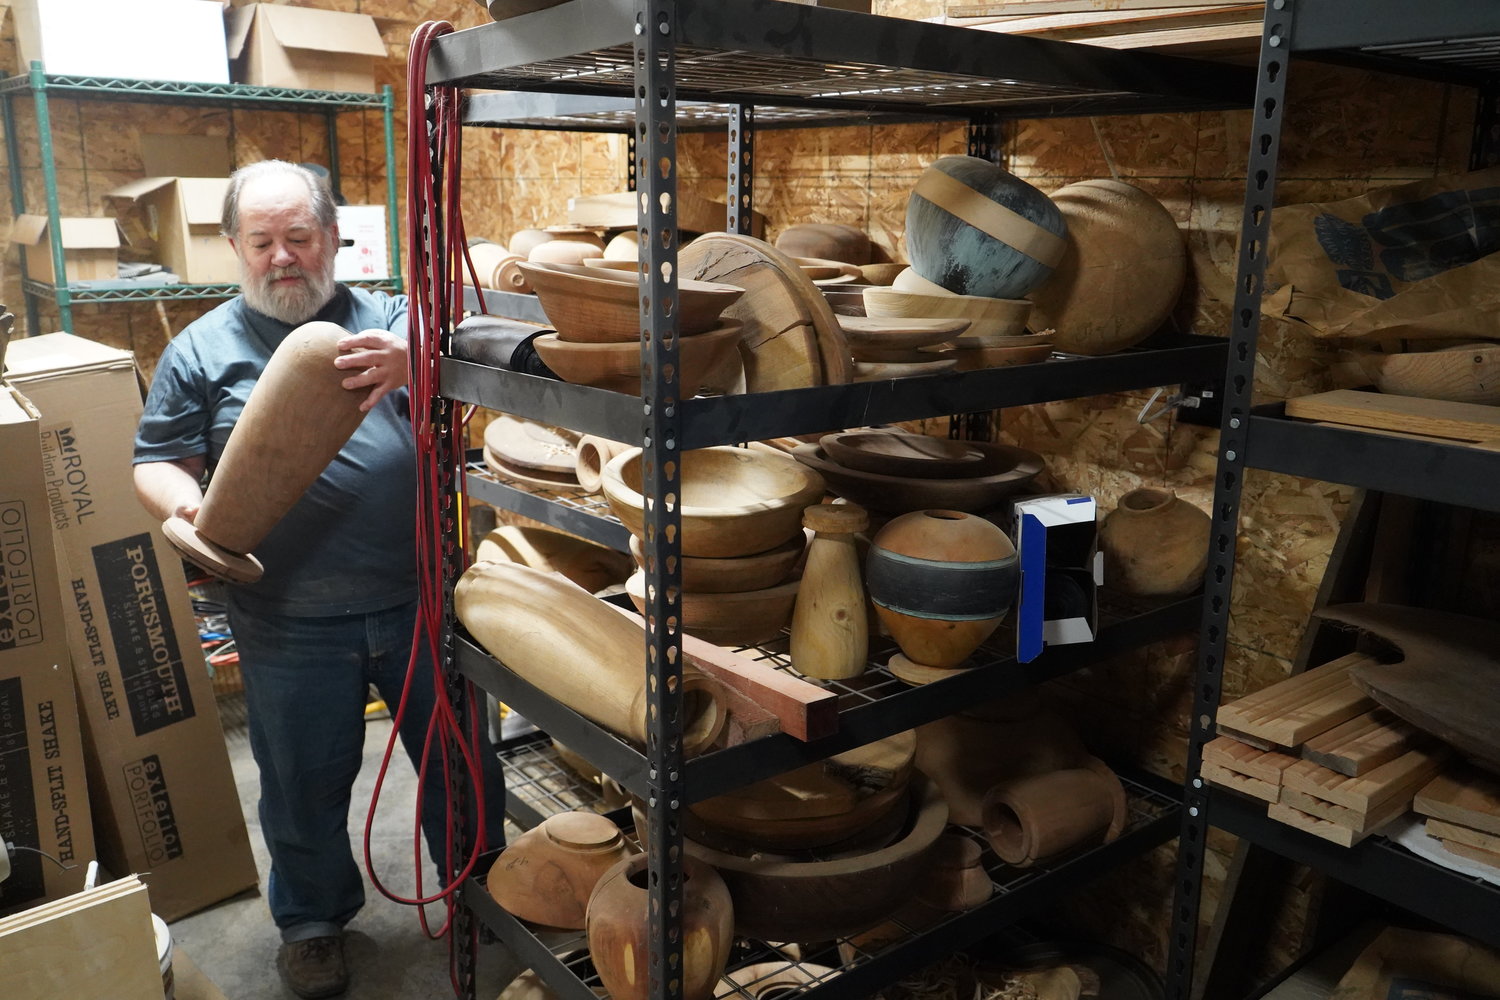 Fr. Means examines works in progress in his woodturning workshop.